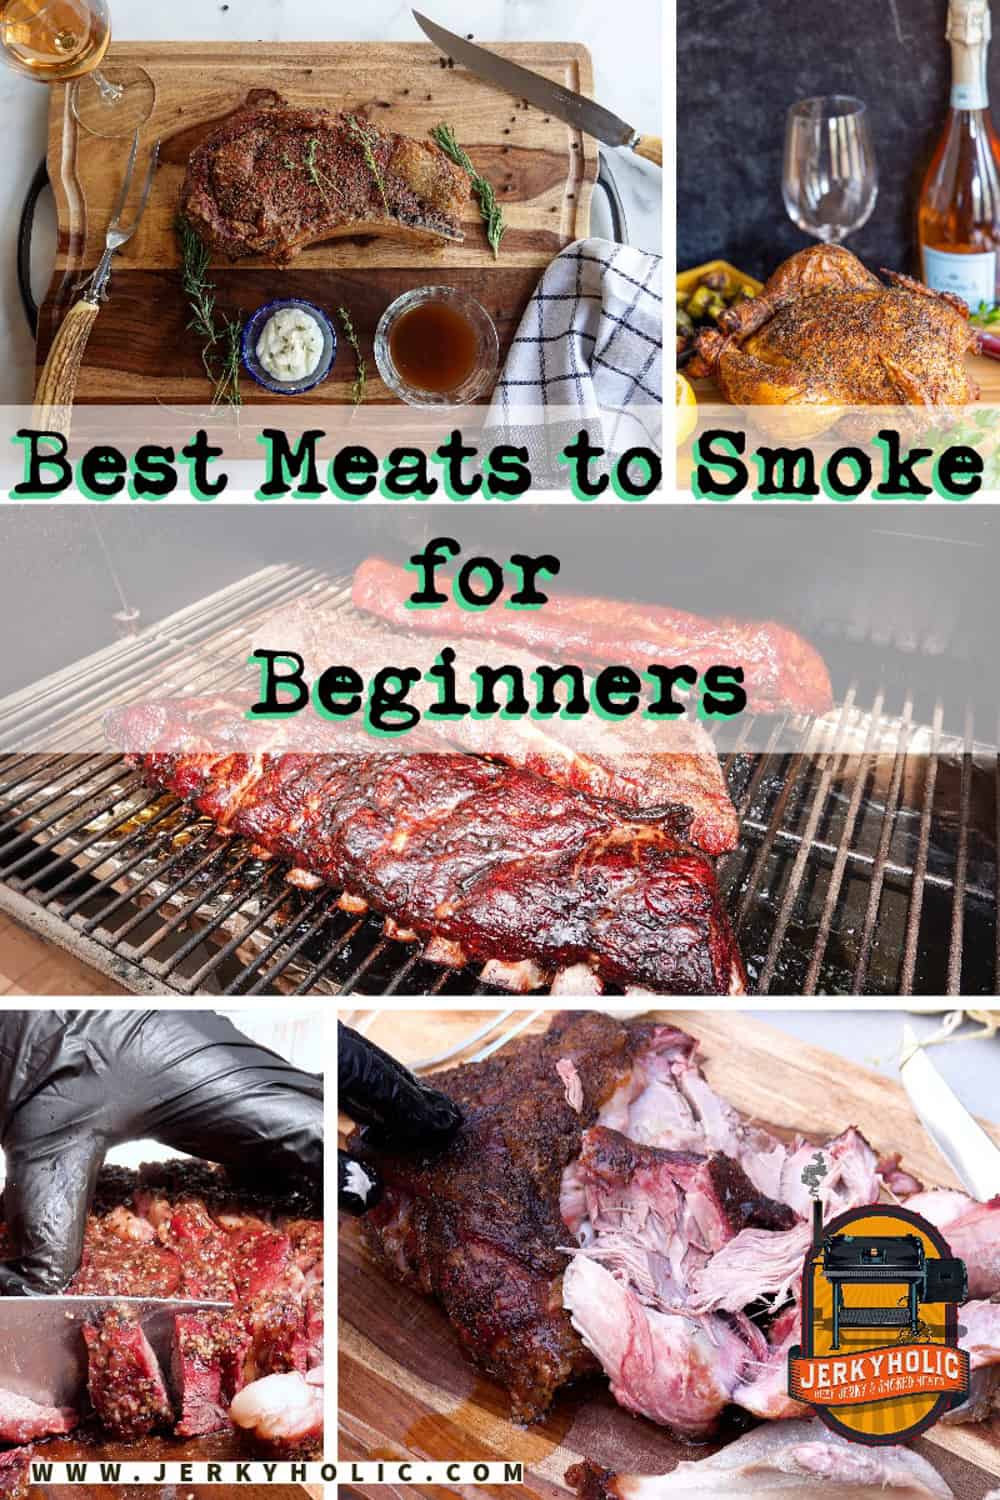 Best Meats to Smoke for Beginners